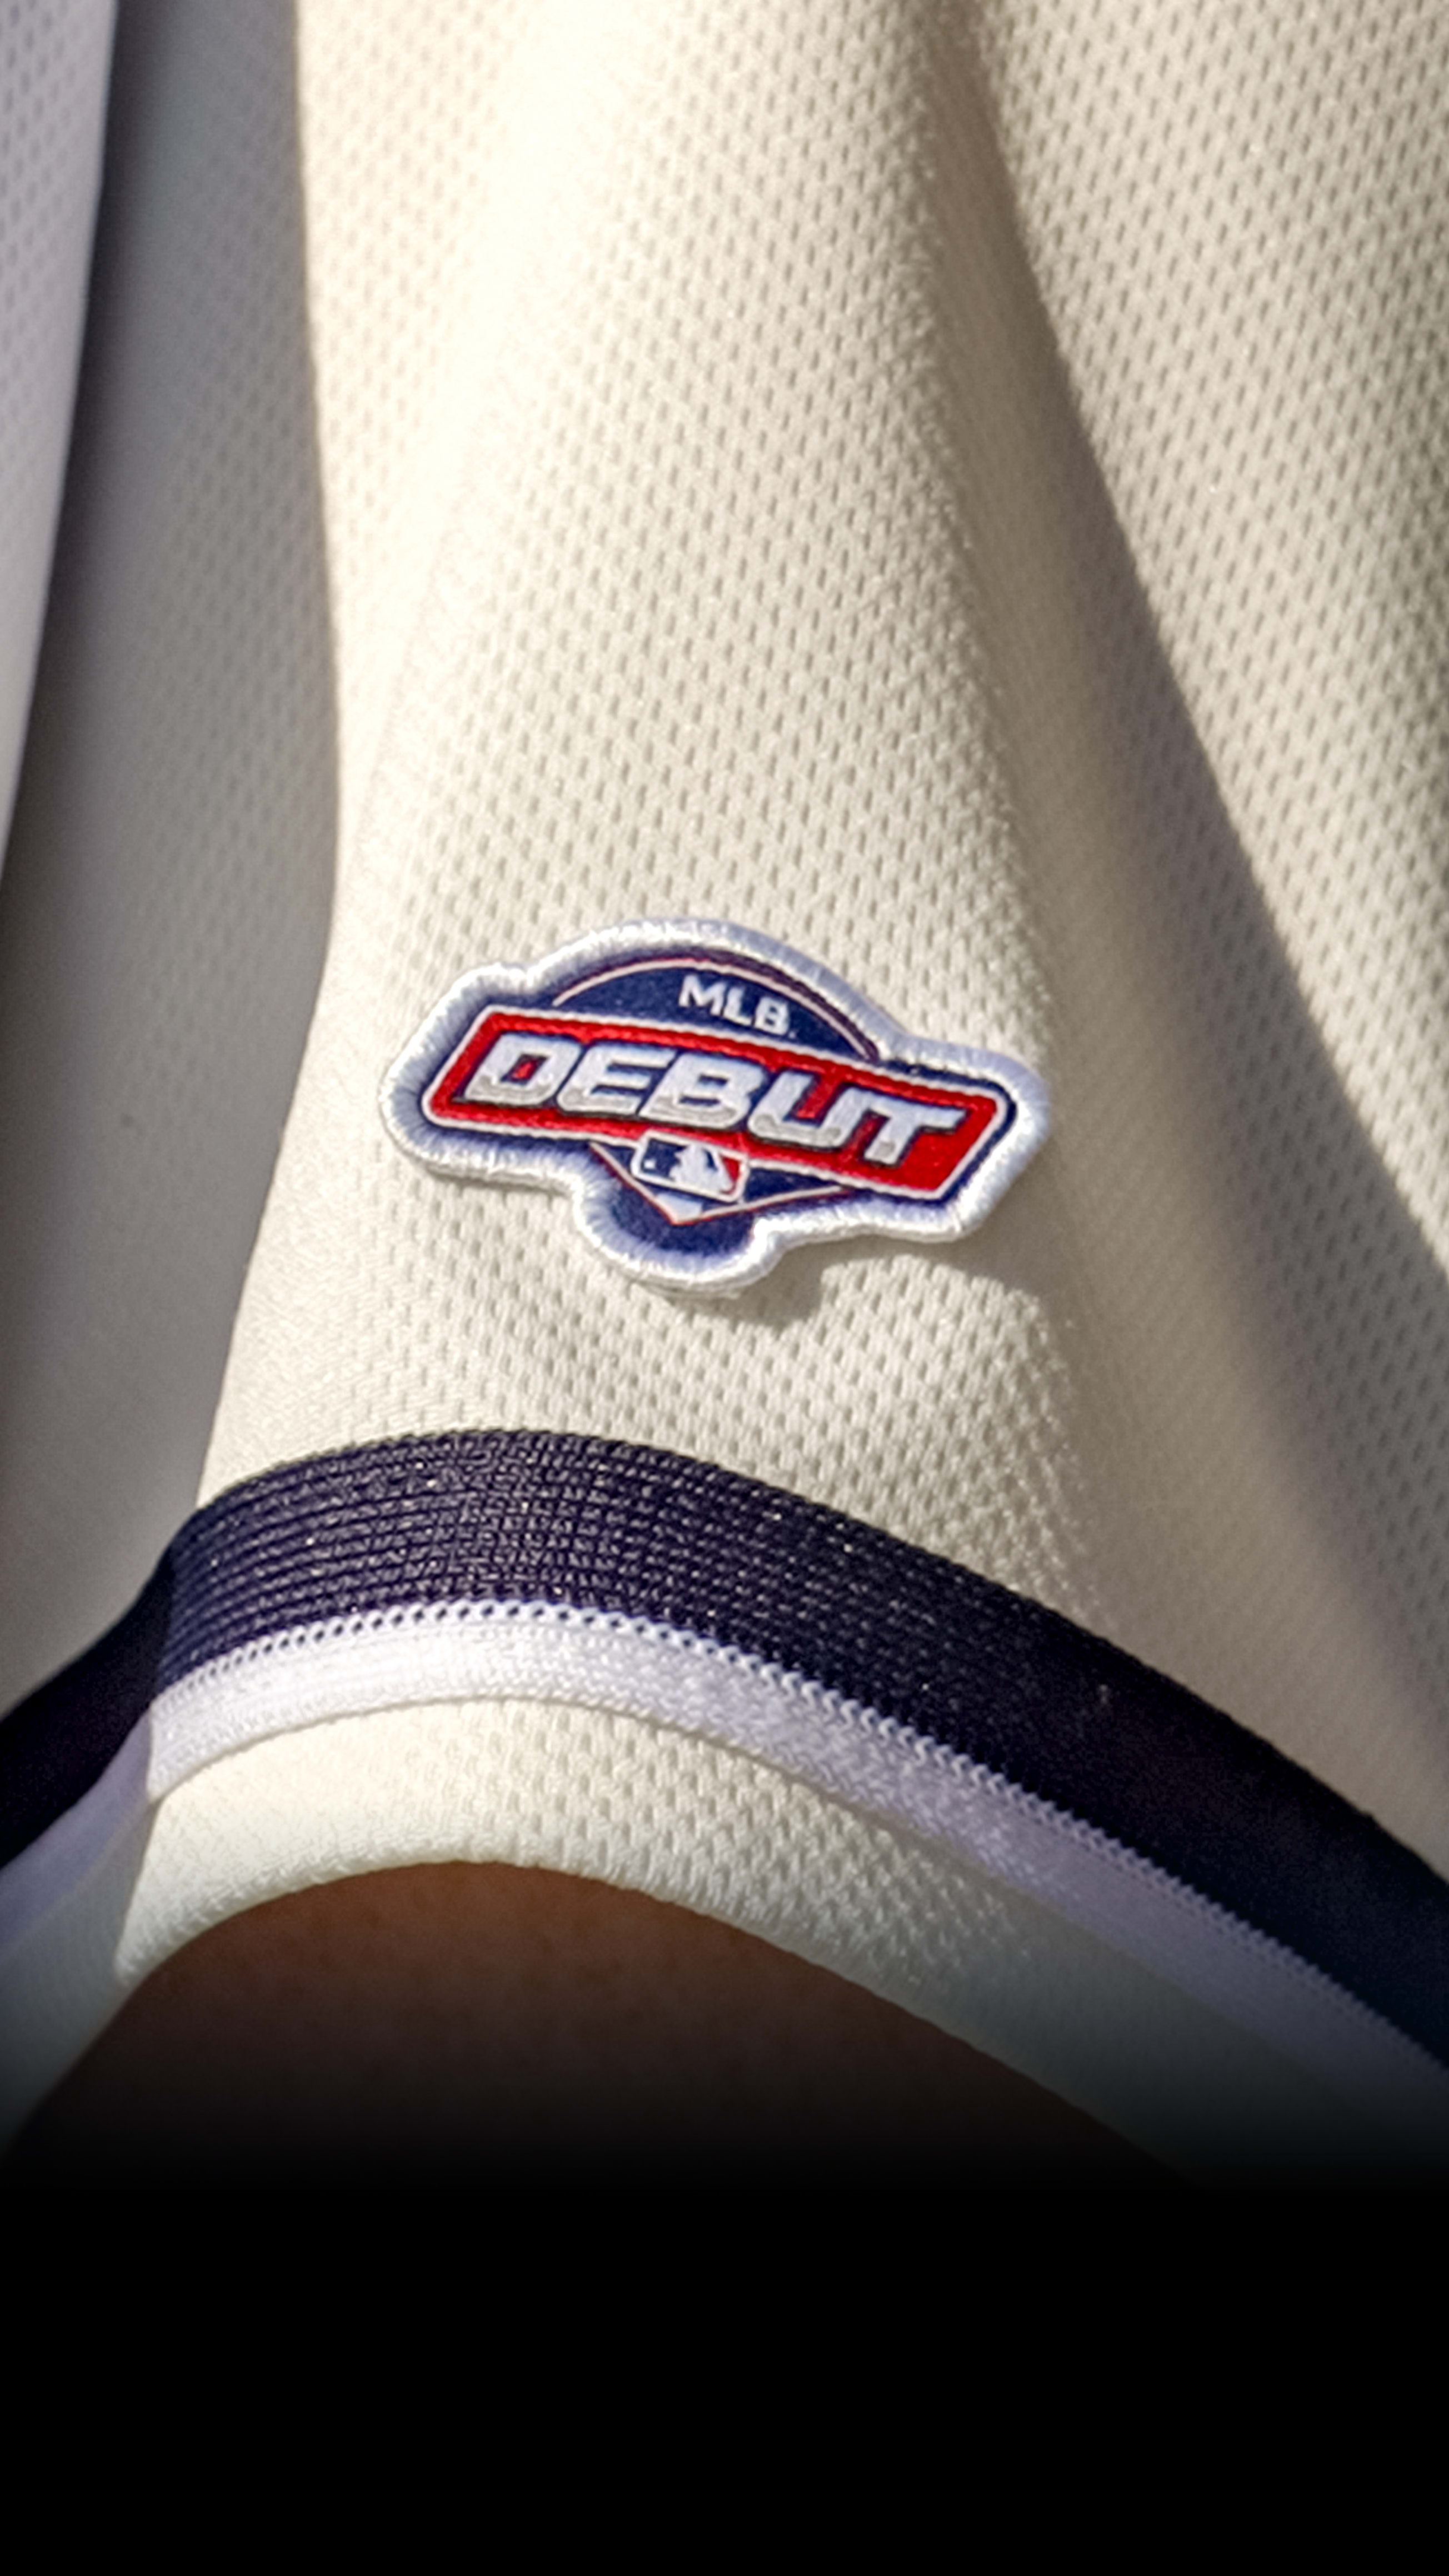 MLB debut players will have special patches on their jerseys - The Boston  Globe